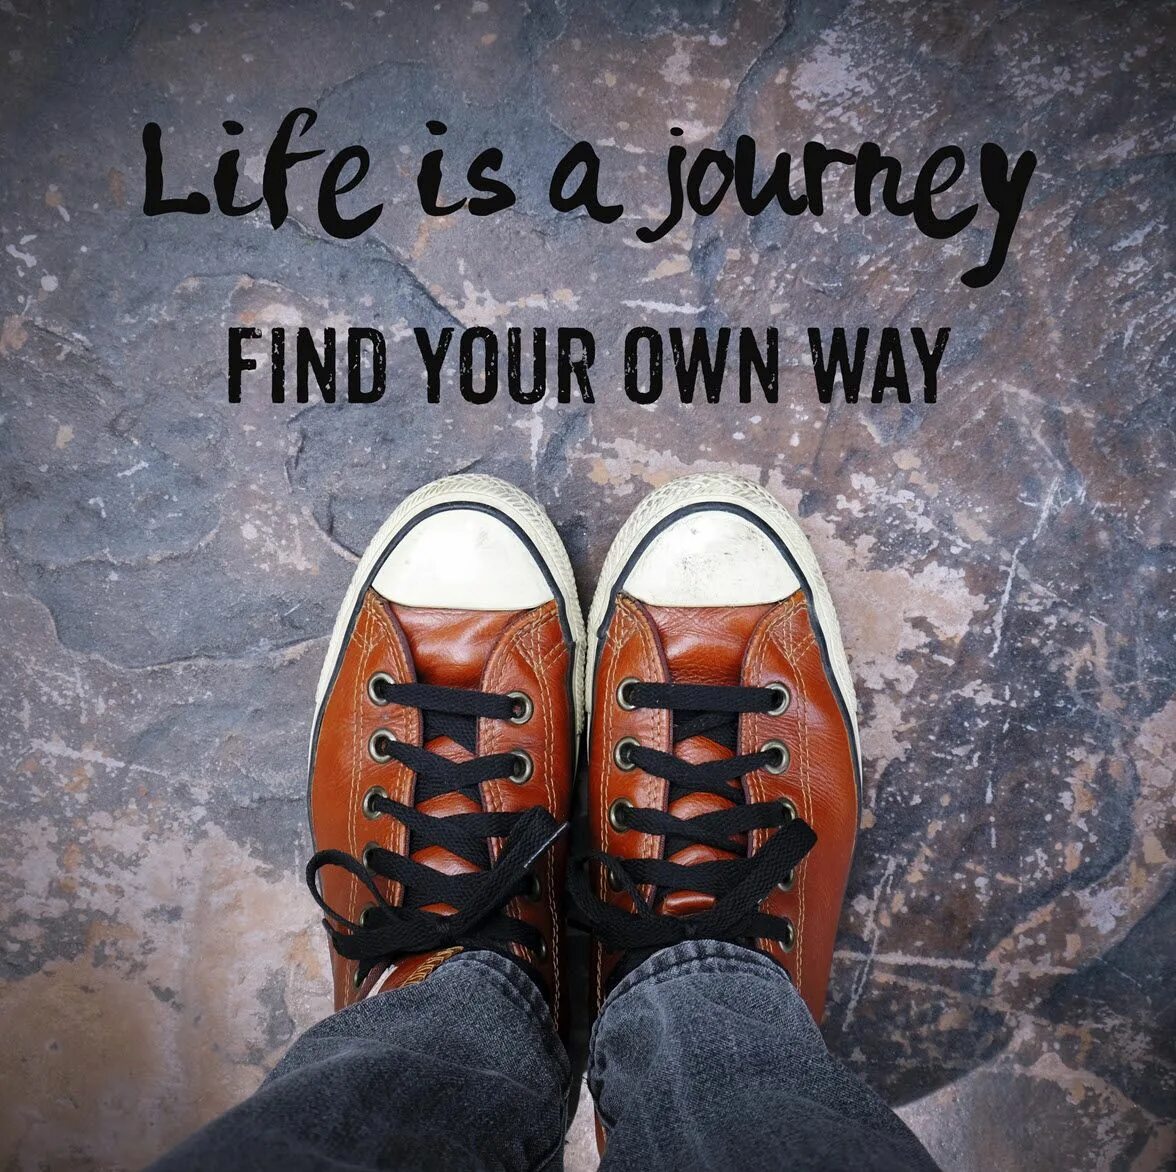 Life is a journey. Ботинки own way. Картинки find your way. Make your own way кроссовки.